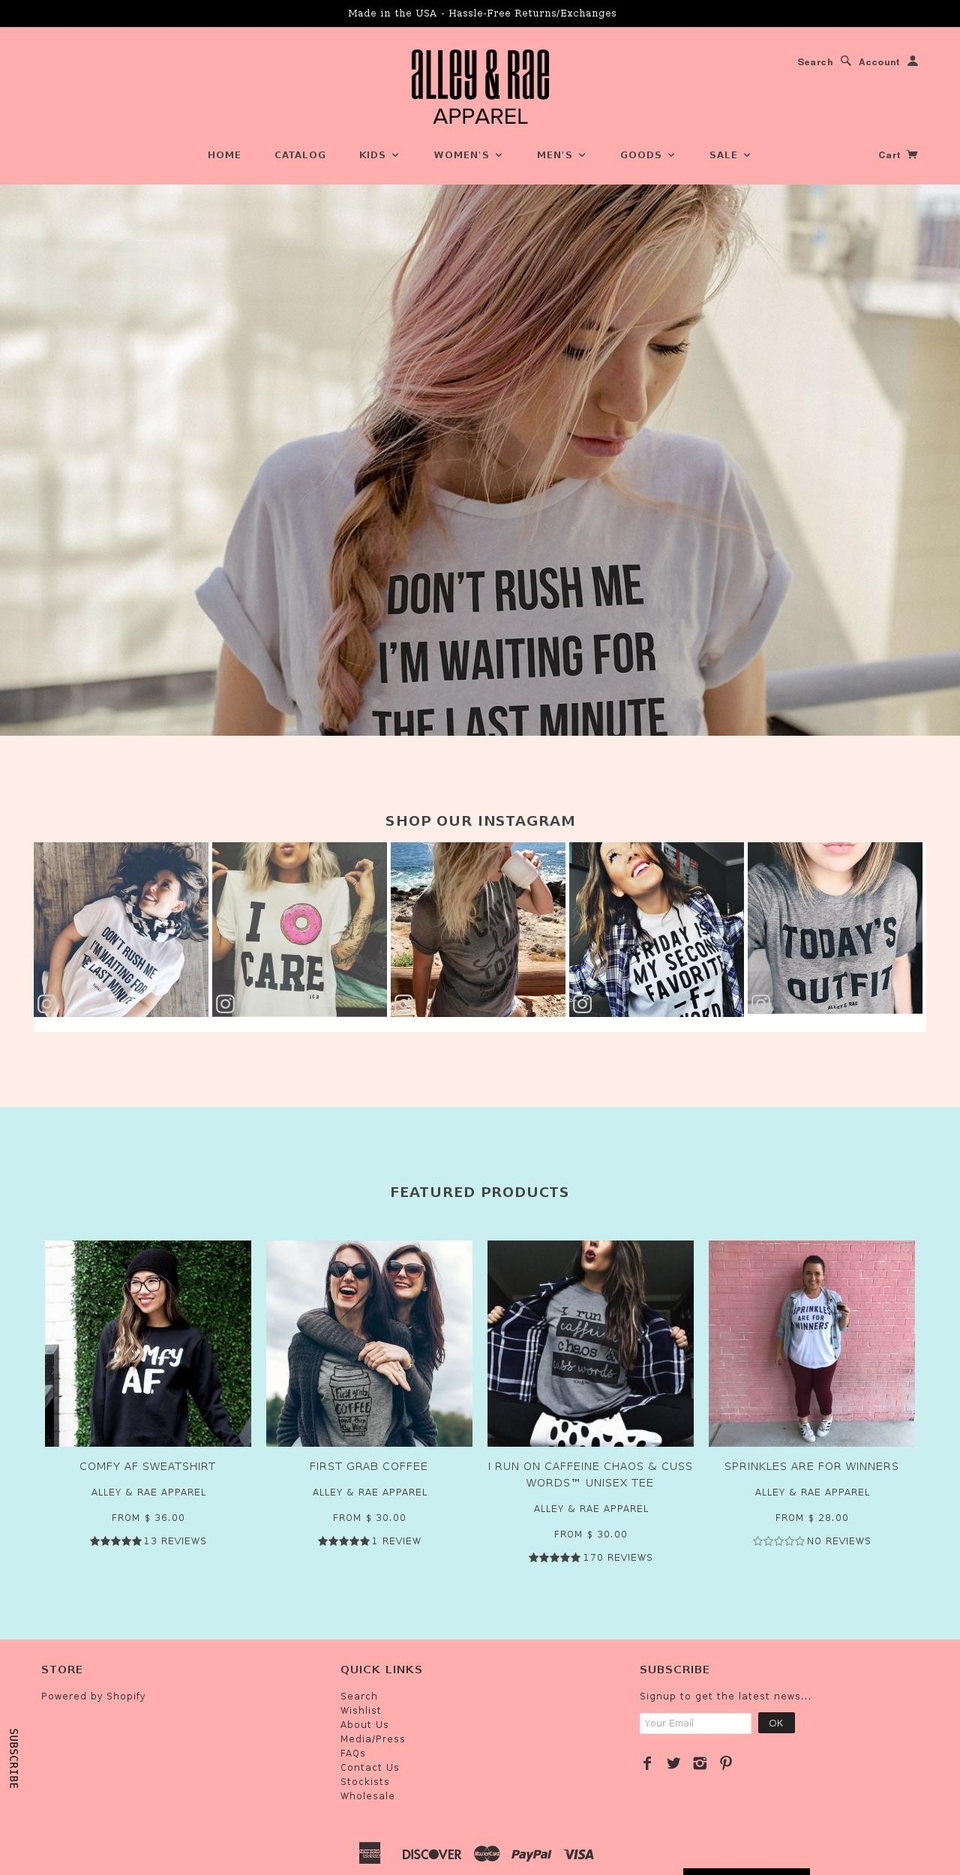 Tailor Shopify theme site example alleyandrae.com